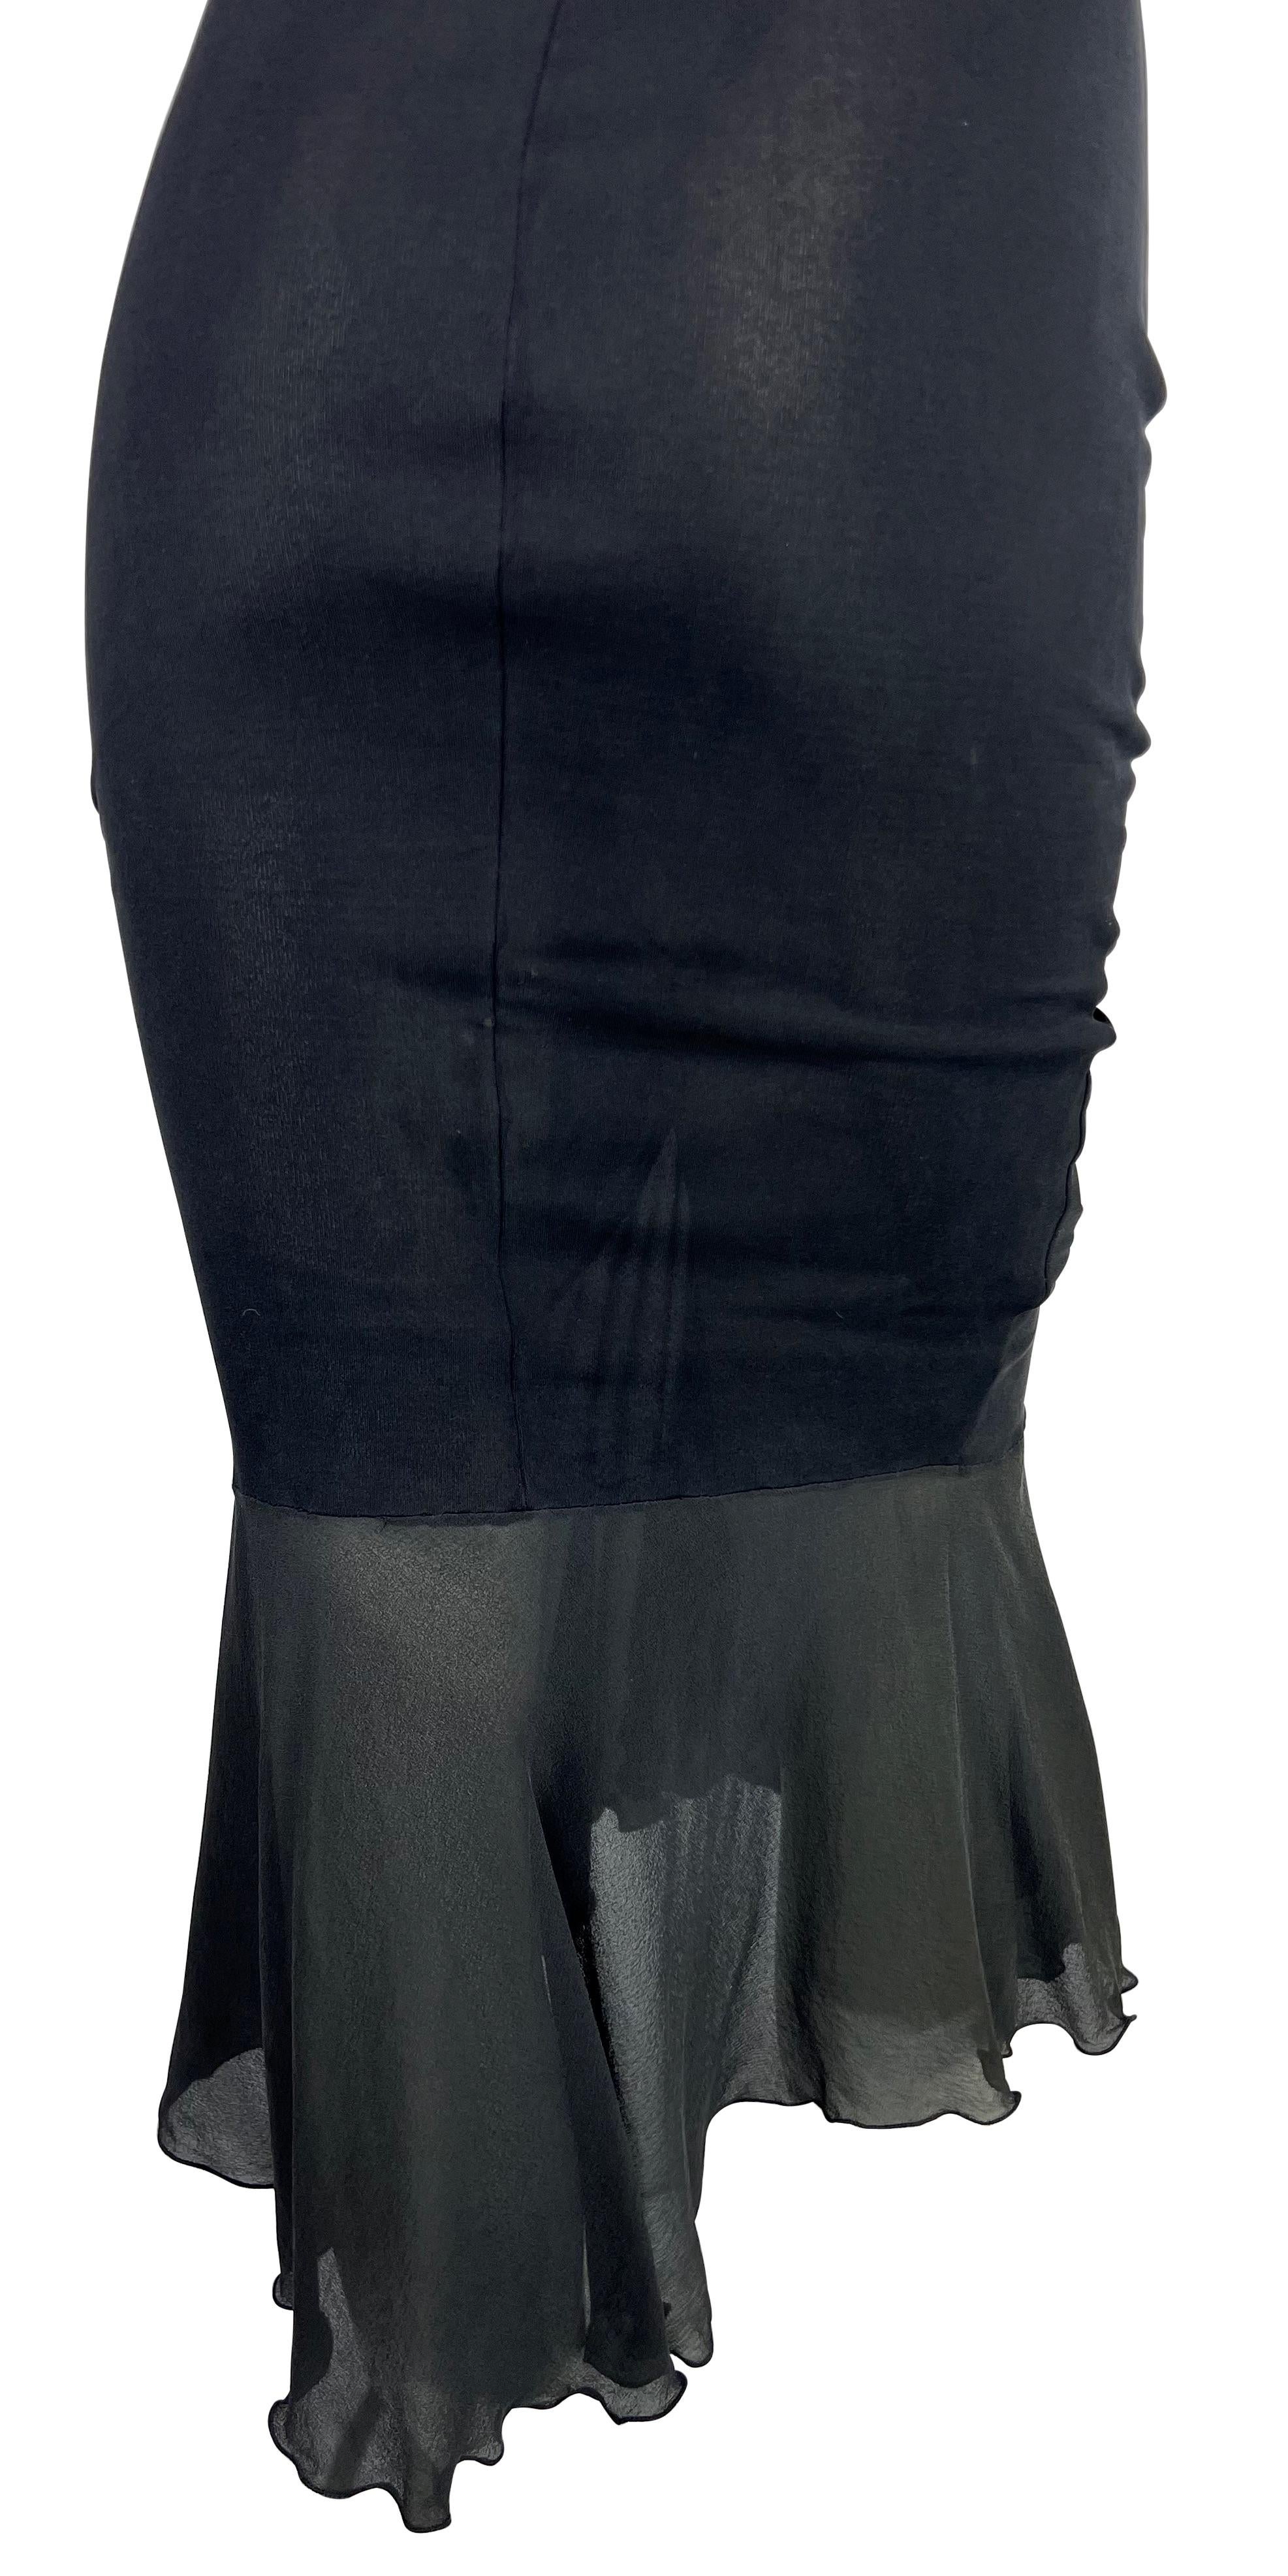 2000s Emanuel Ungaro Ruched Black Slinky Bodycon Dress Lace Strap For Sale 2